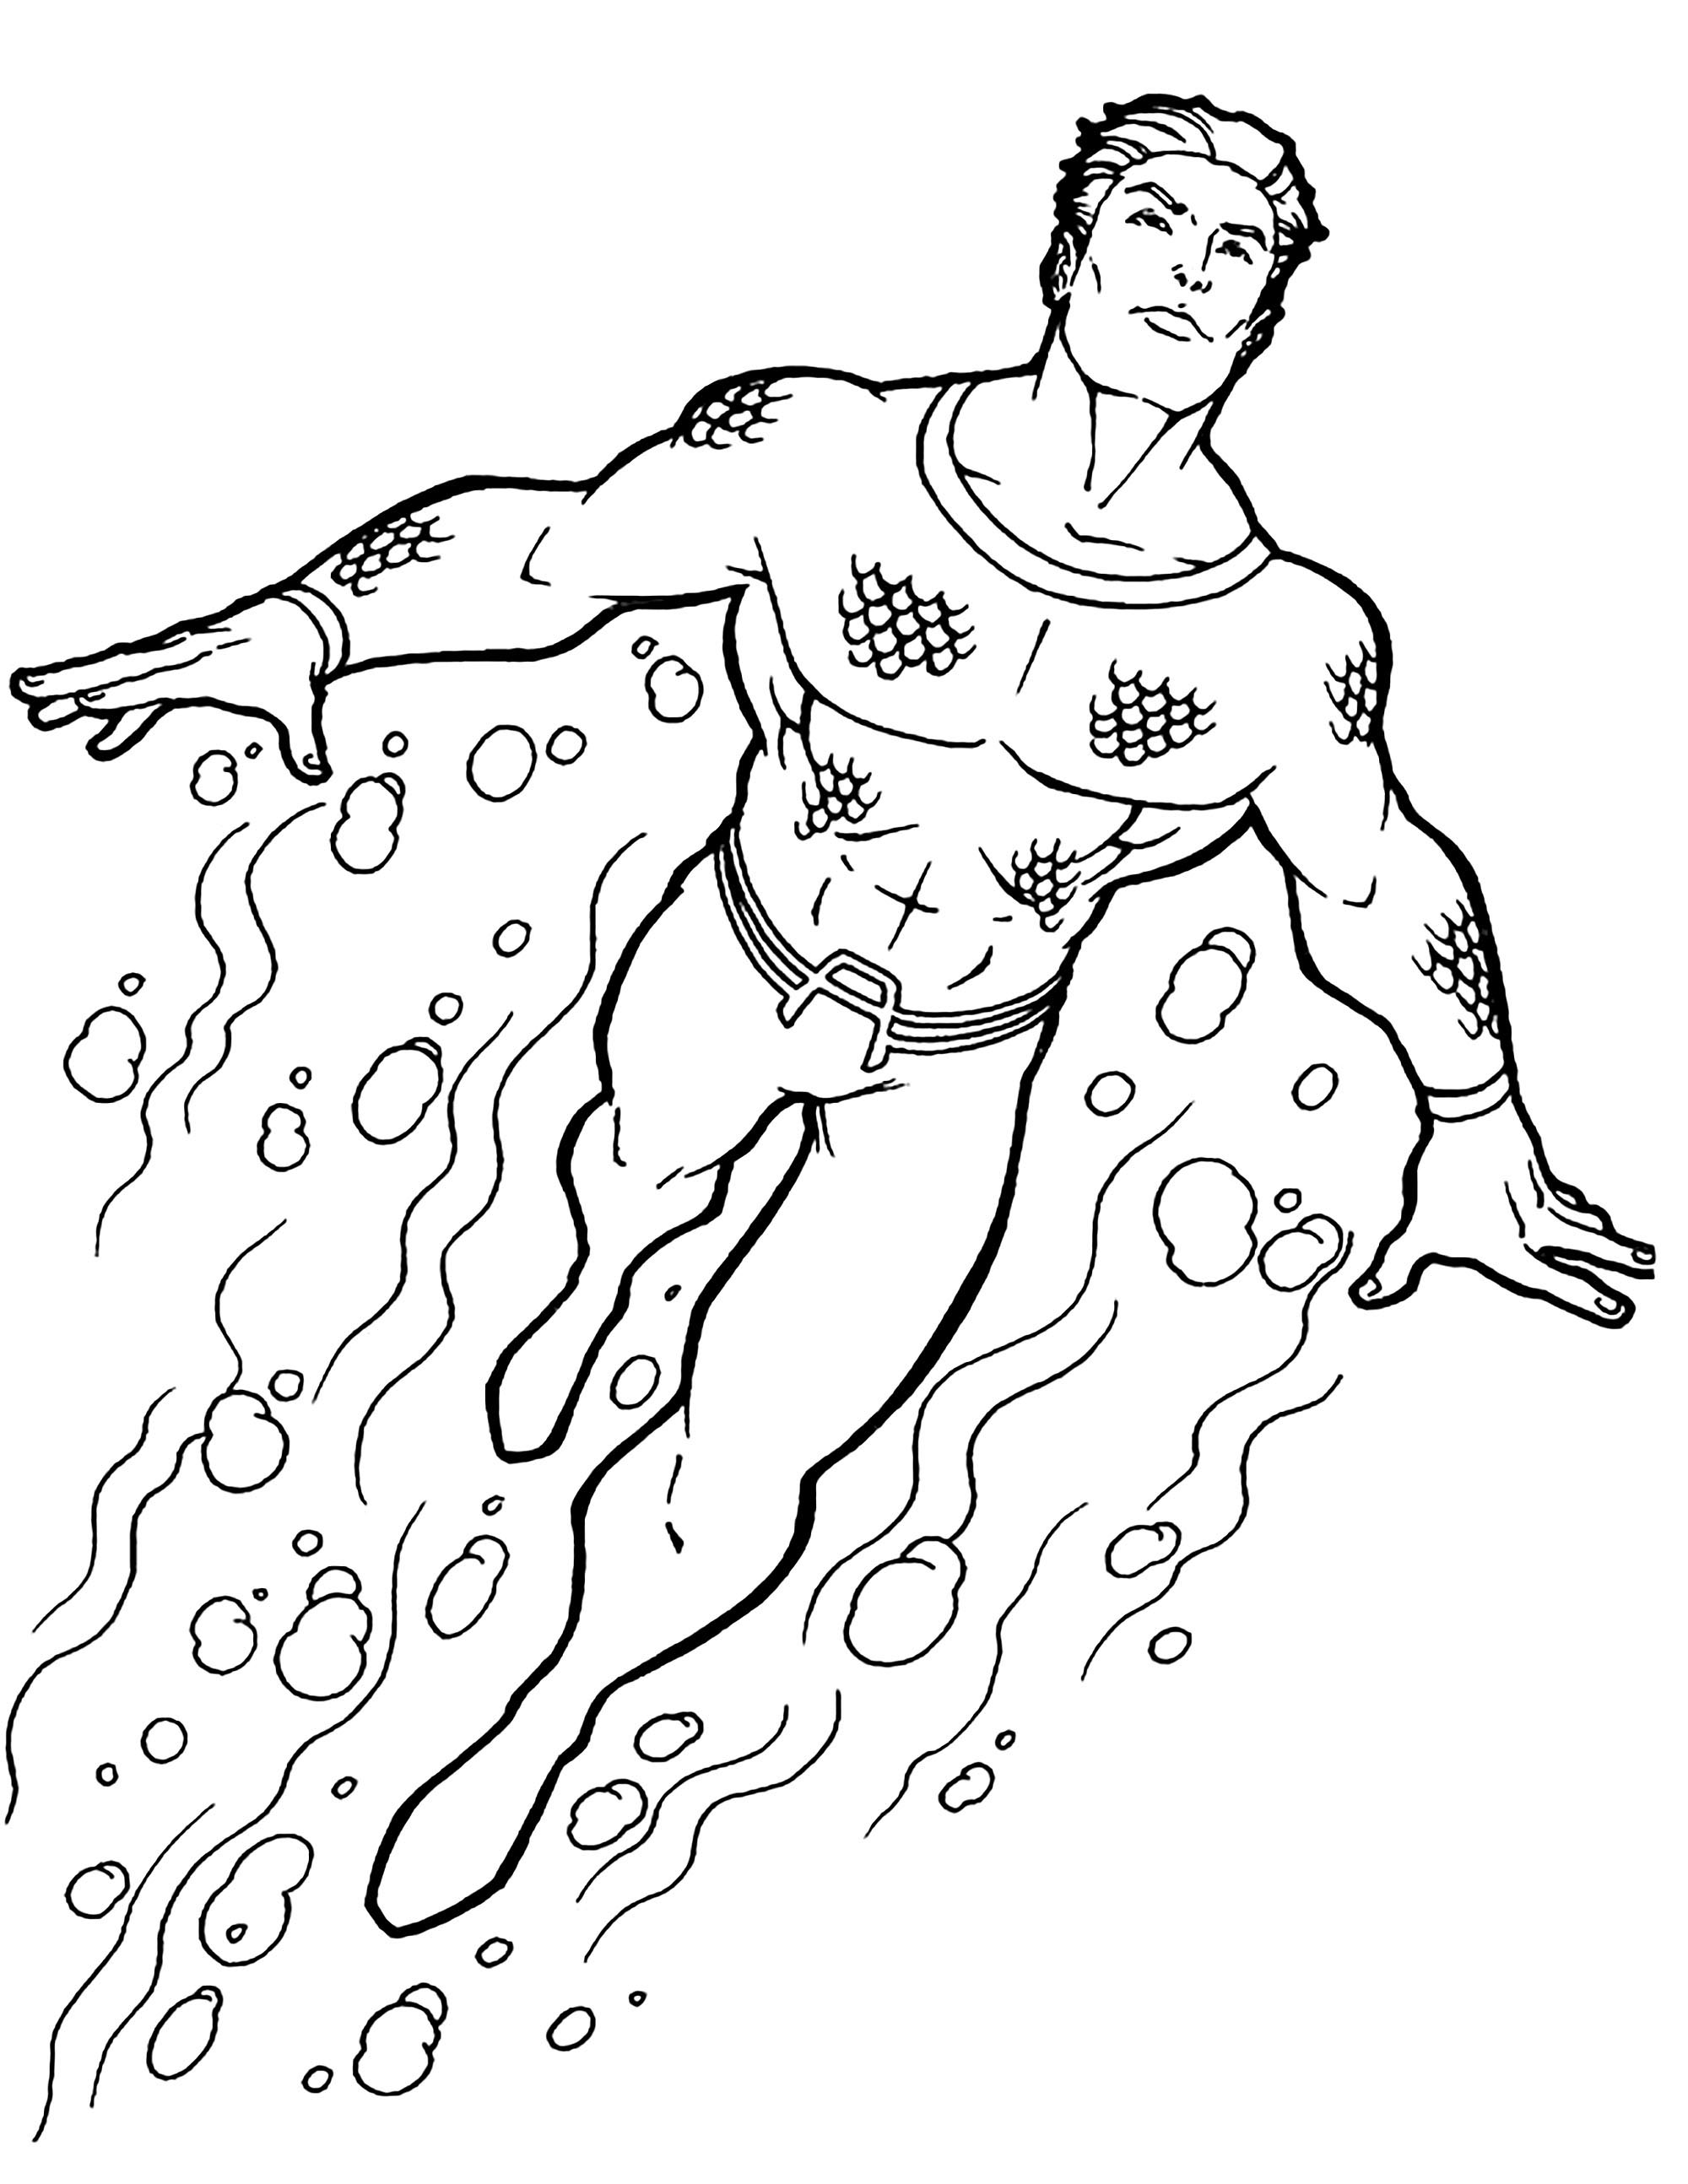 Aquaman Swimming Coloring Pages